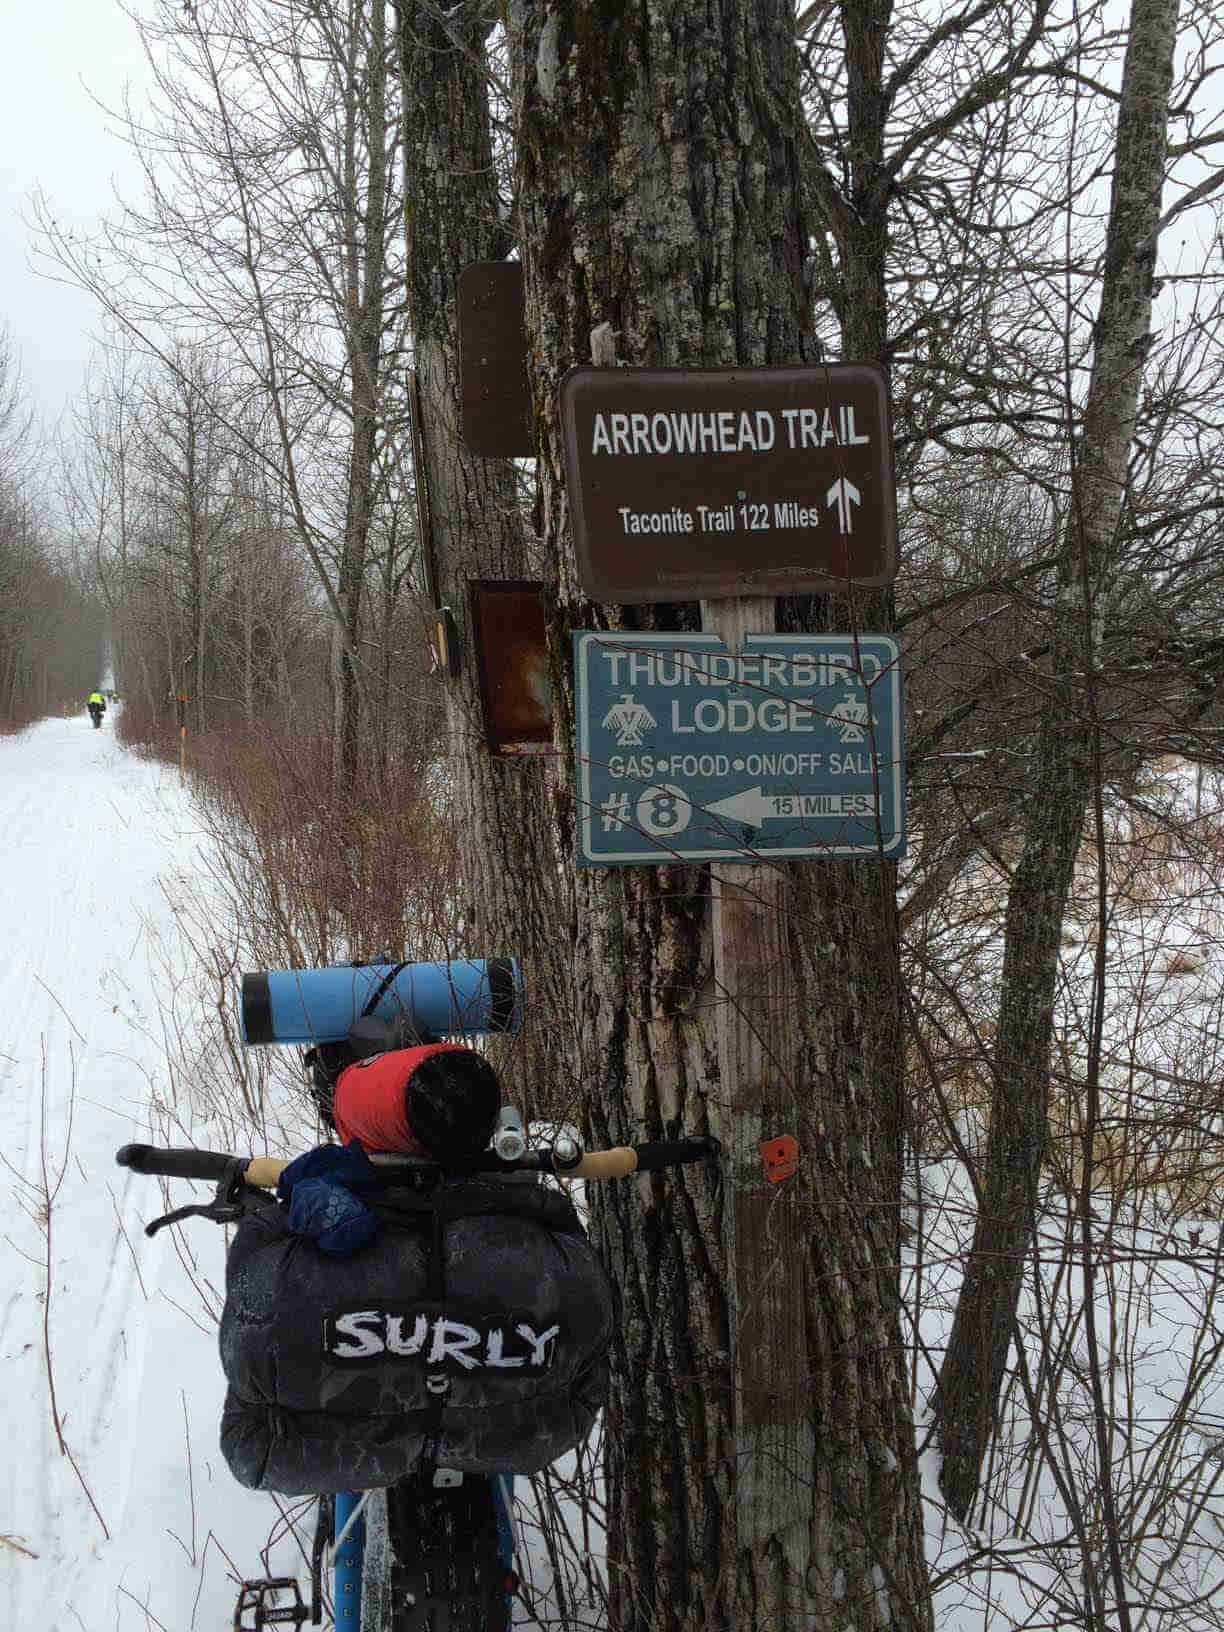 Front view of a Surly fat bike loaded with gear, parked against a tree on the side of a snowy trail